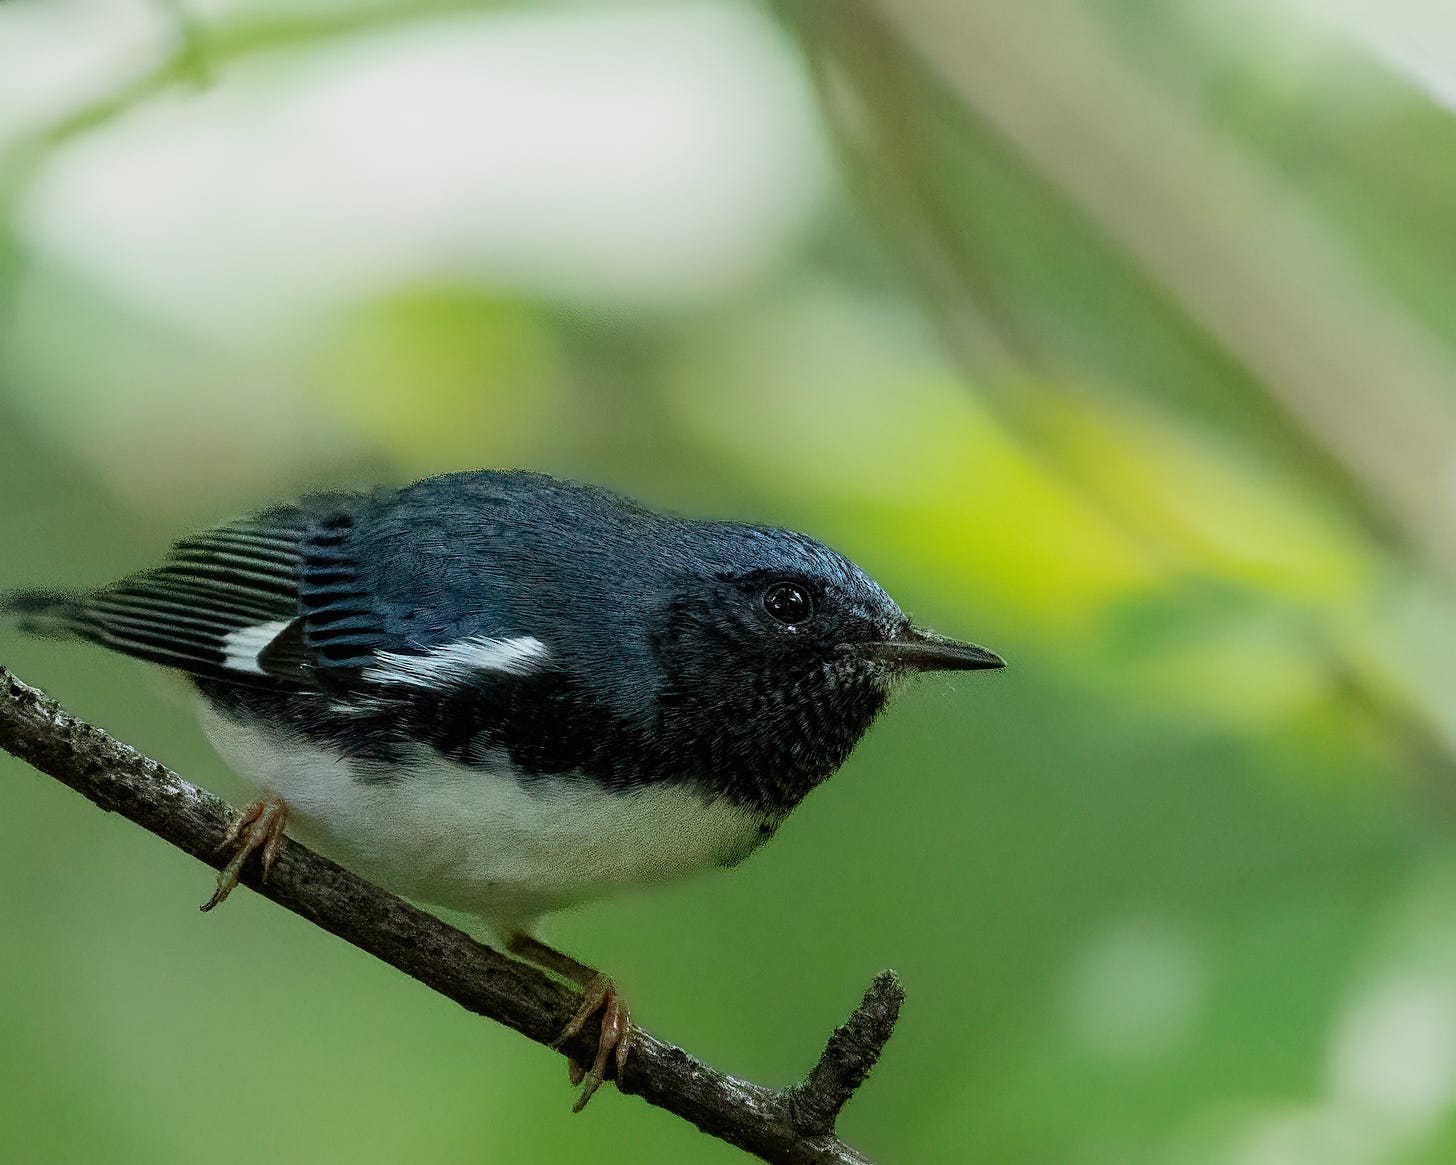 The black throated blue warbler is perched on a branch. It has a black throat, a white belly, and a dark blue back.